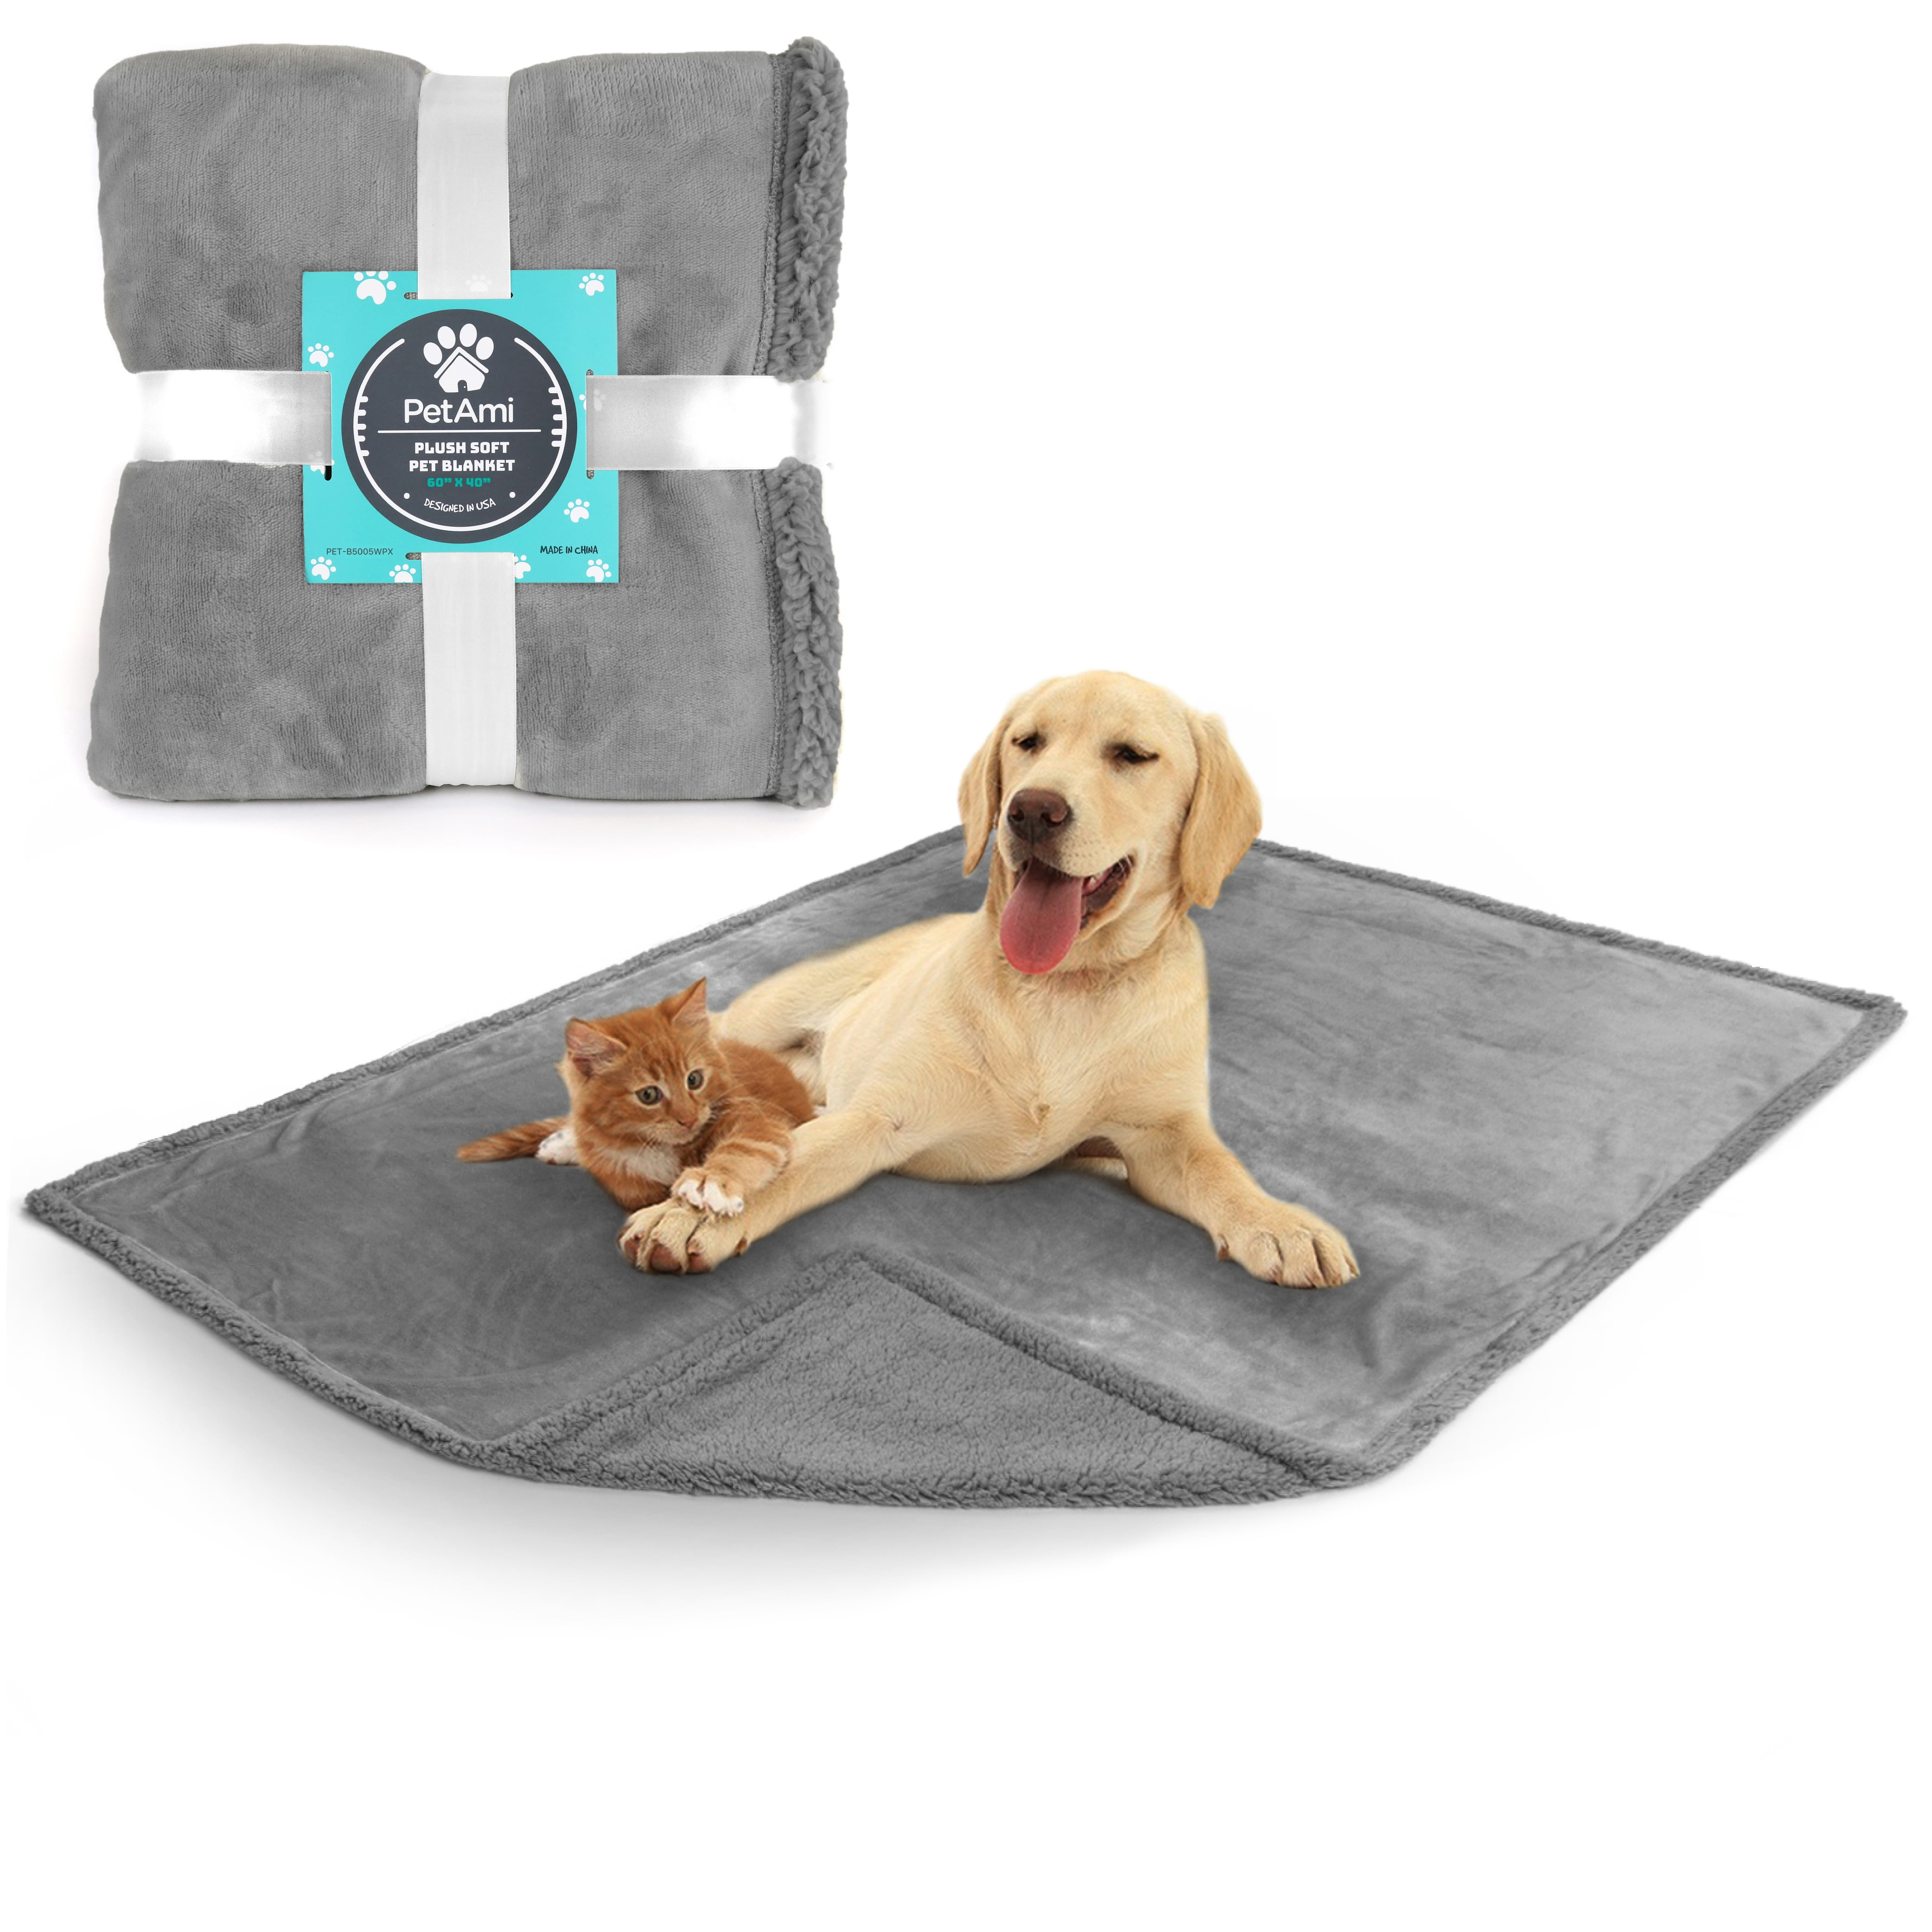 Petami Waterproof Dog Bed Cover Pet Blanket for Medium Large Dog, Couch Cover Sofa Furniture Protector for Dogs Cat, Reversible